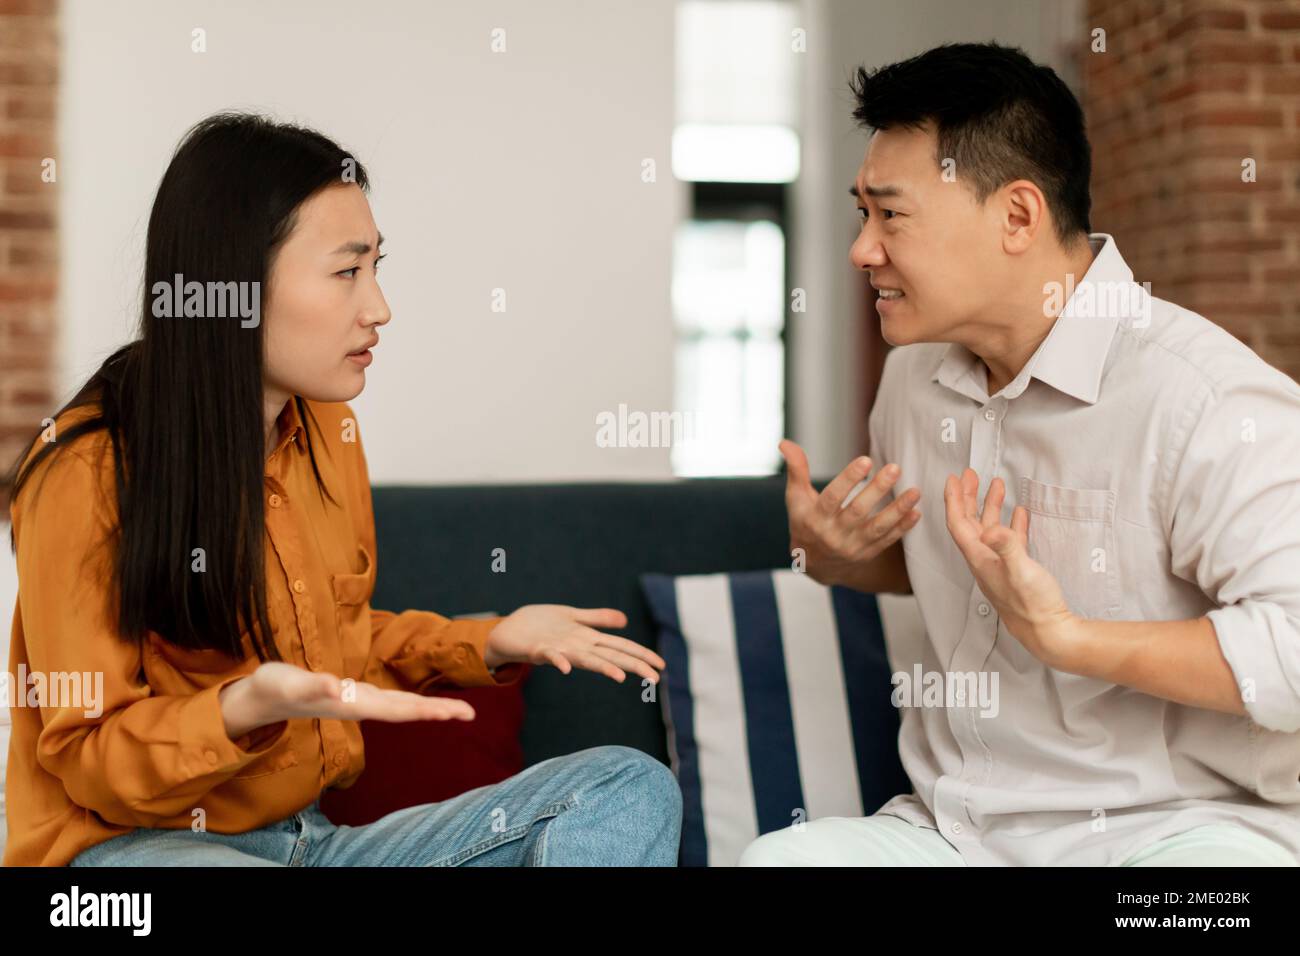 Angry asian spouses having quarrel, sitting on sofa and arguing, looking at each other, side view Stock Photo